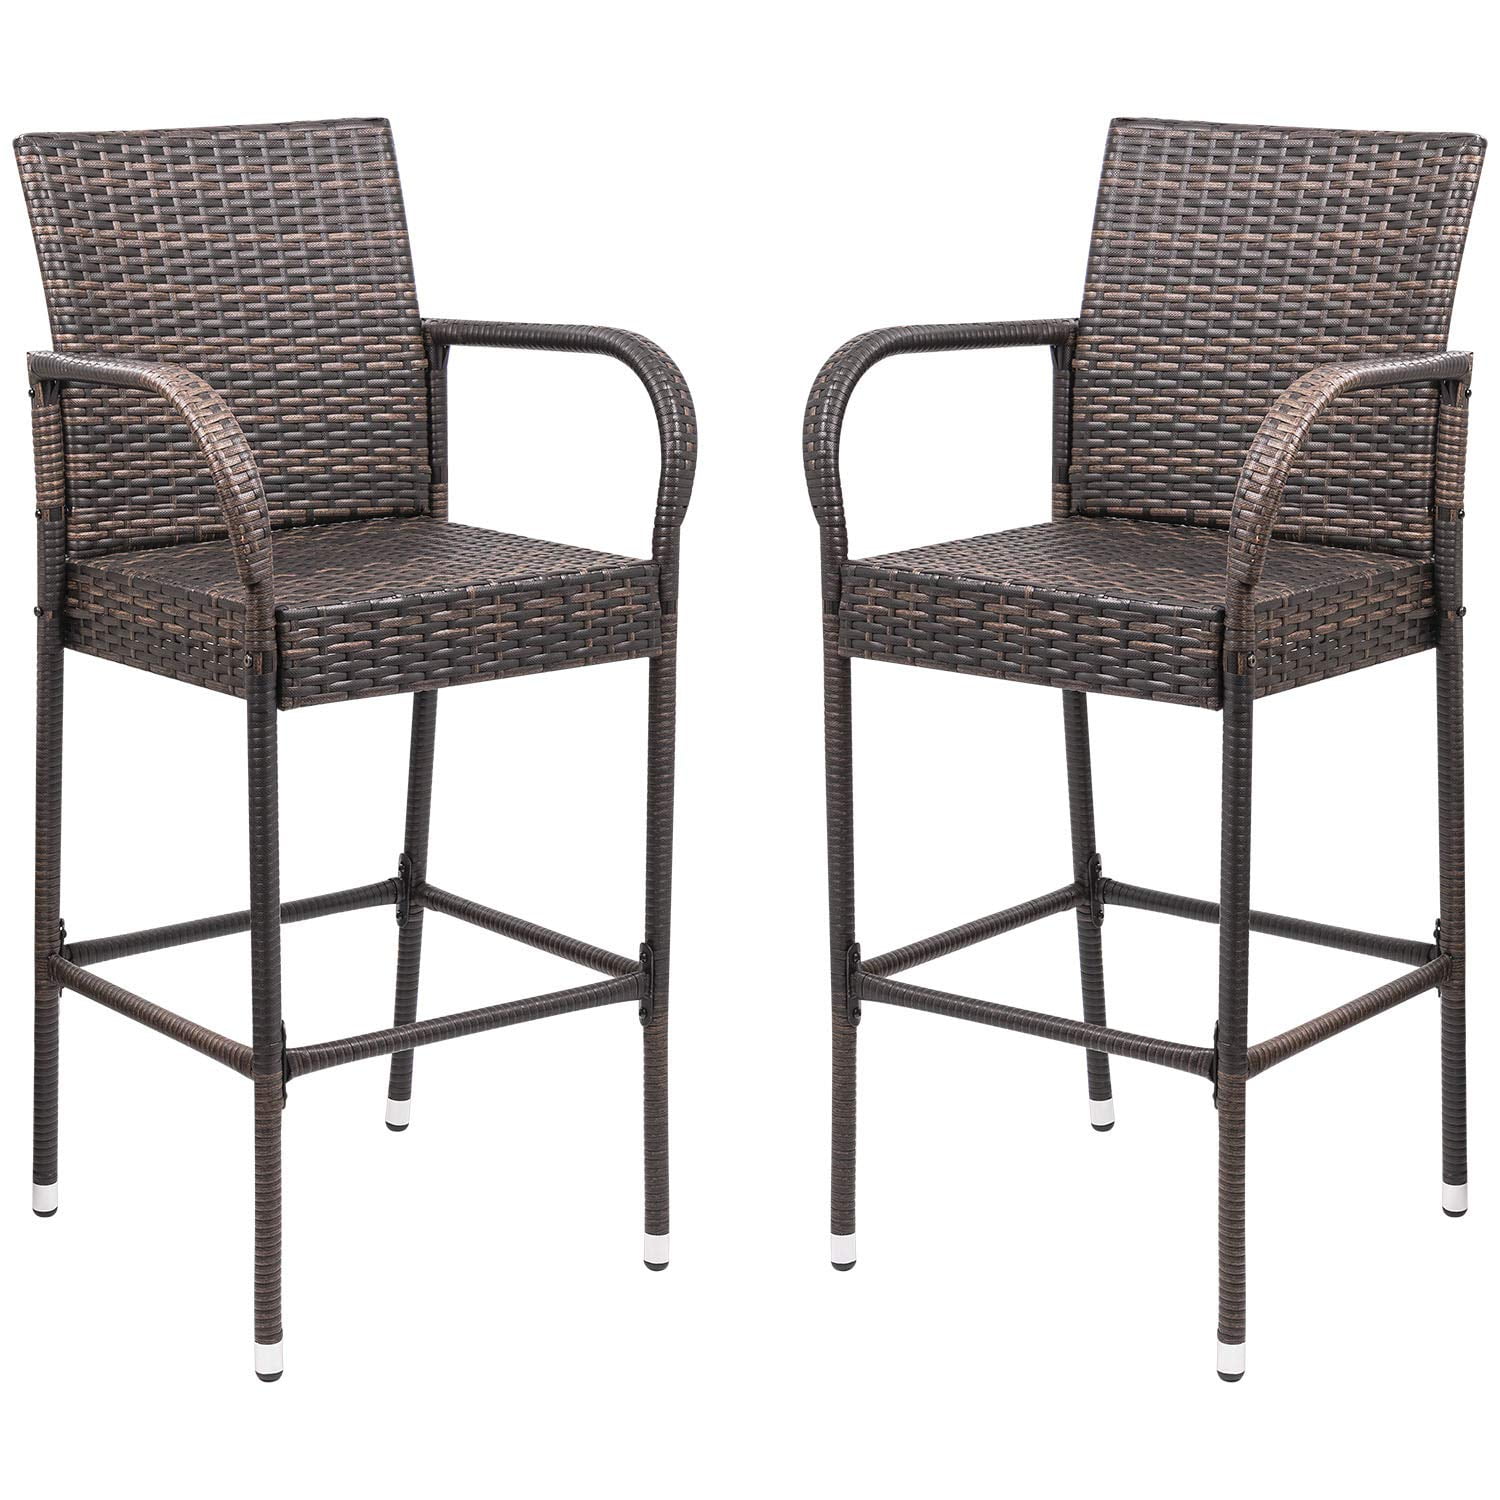 Outdoor Bbq Bar Stools - Outdoor comfort in every size, shape, pattern